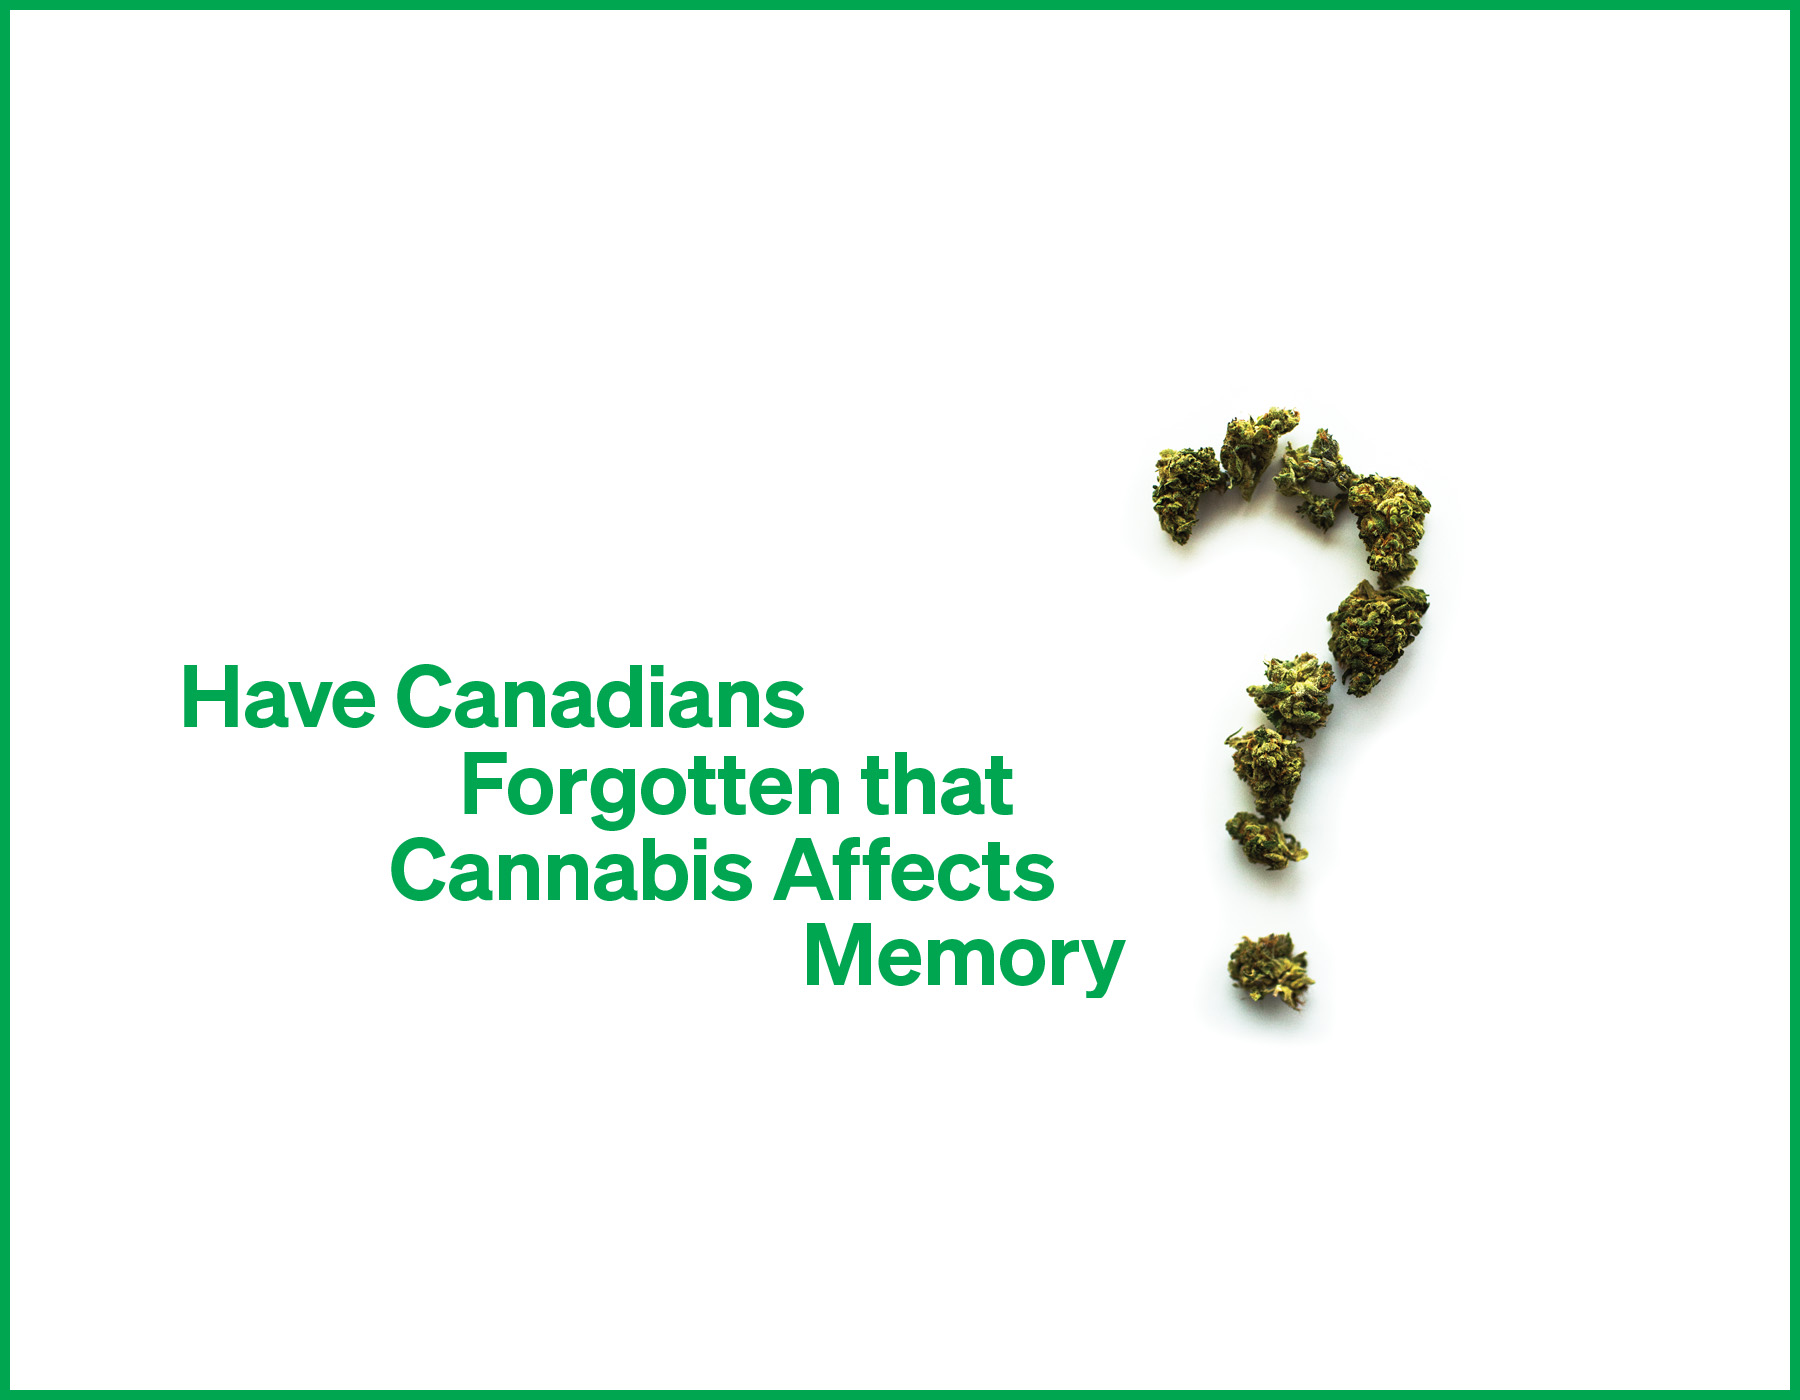 Have Canadians Forgotten that Cannabis Affects Memory?